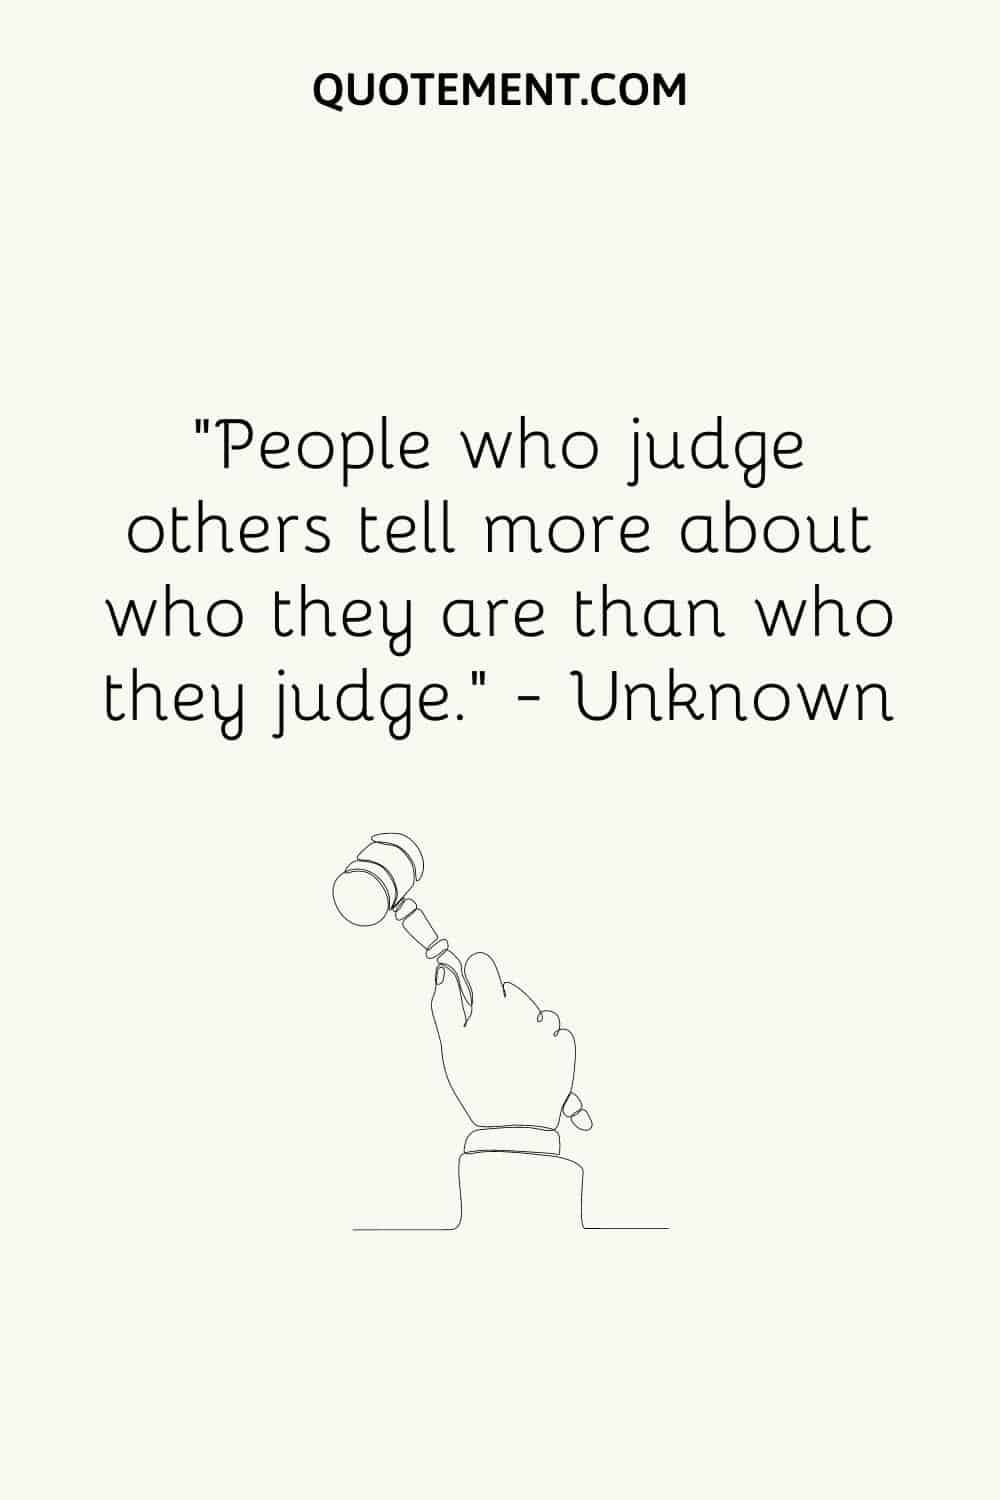 “People who judge others tell more about who they are than who they judge.” — Unknown